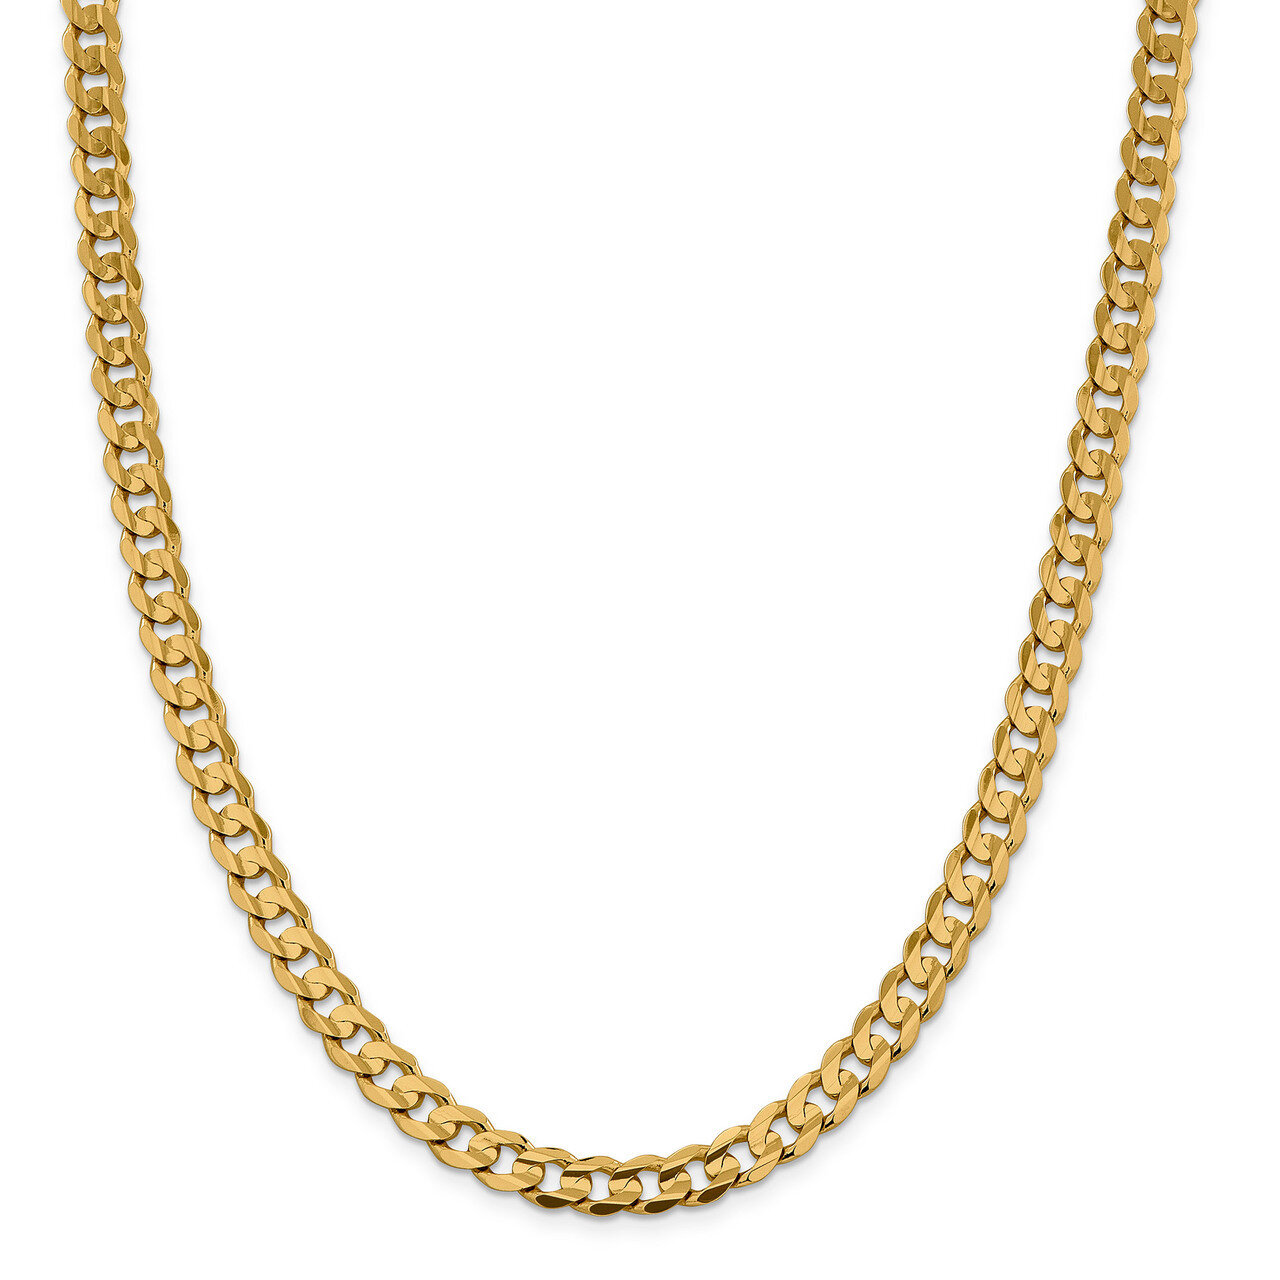 20 Inch 7.5mm Open Concave Curb Chain 14k Gold LCR200-20